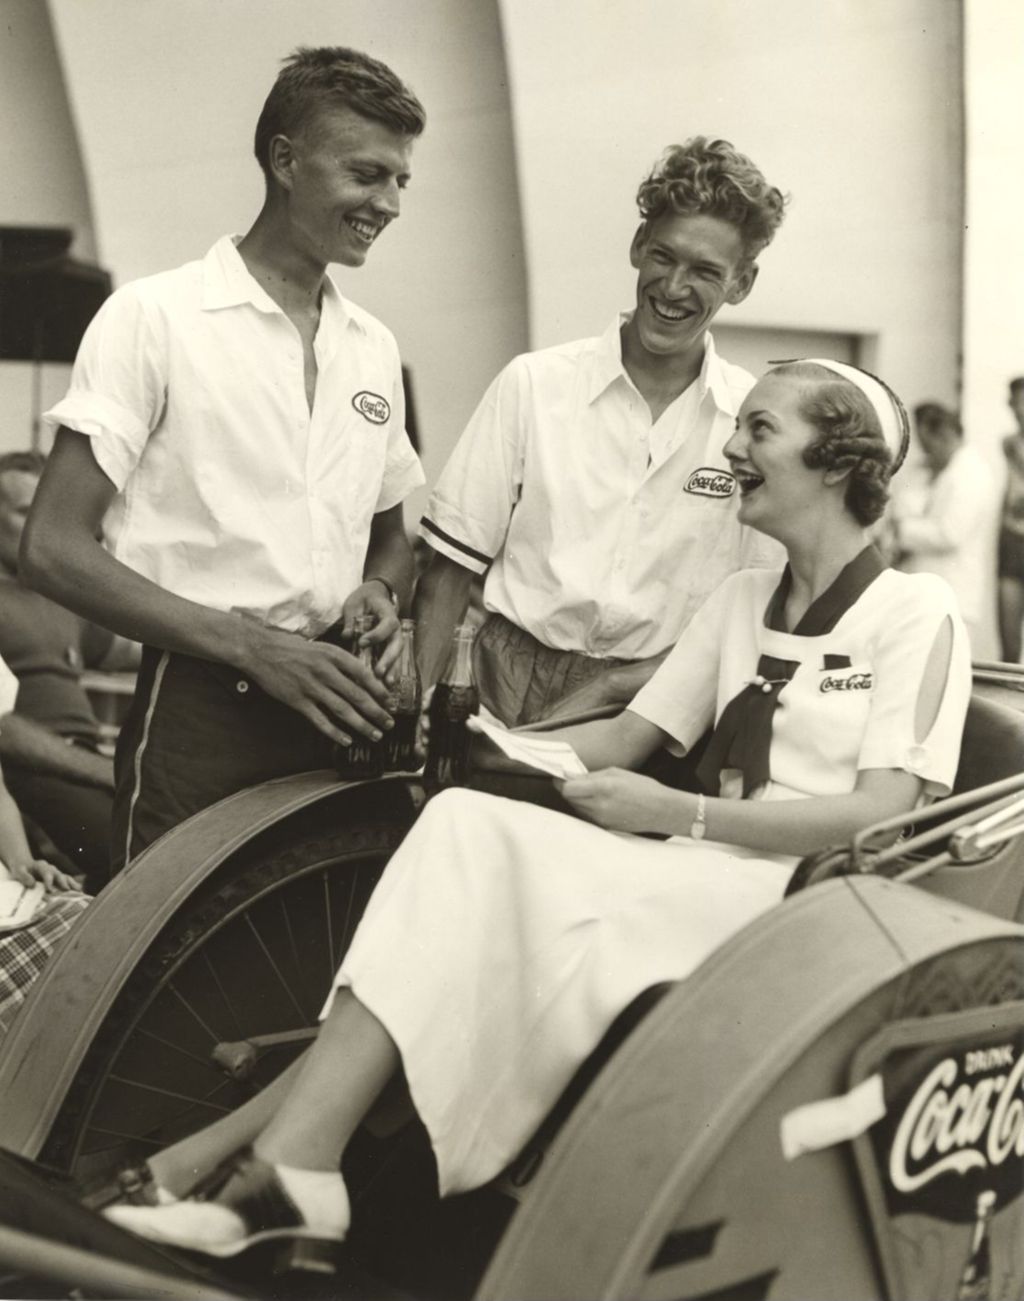 Miniature of Members of the Coca-Cola team celebrate after winning the Century of Progress rickshaw race. They are, from left to right: Bob Milow, George Nelson, and Jane Fite.